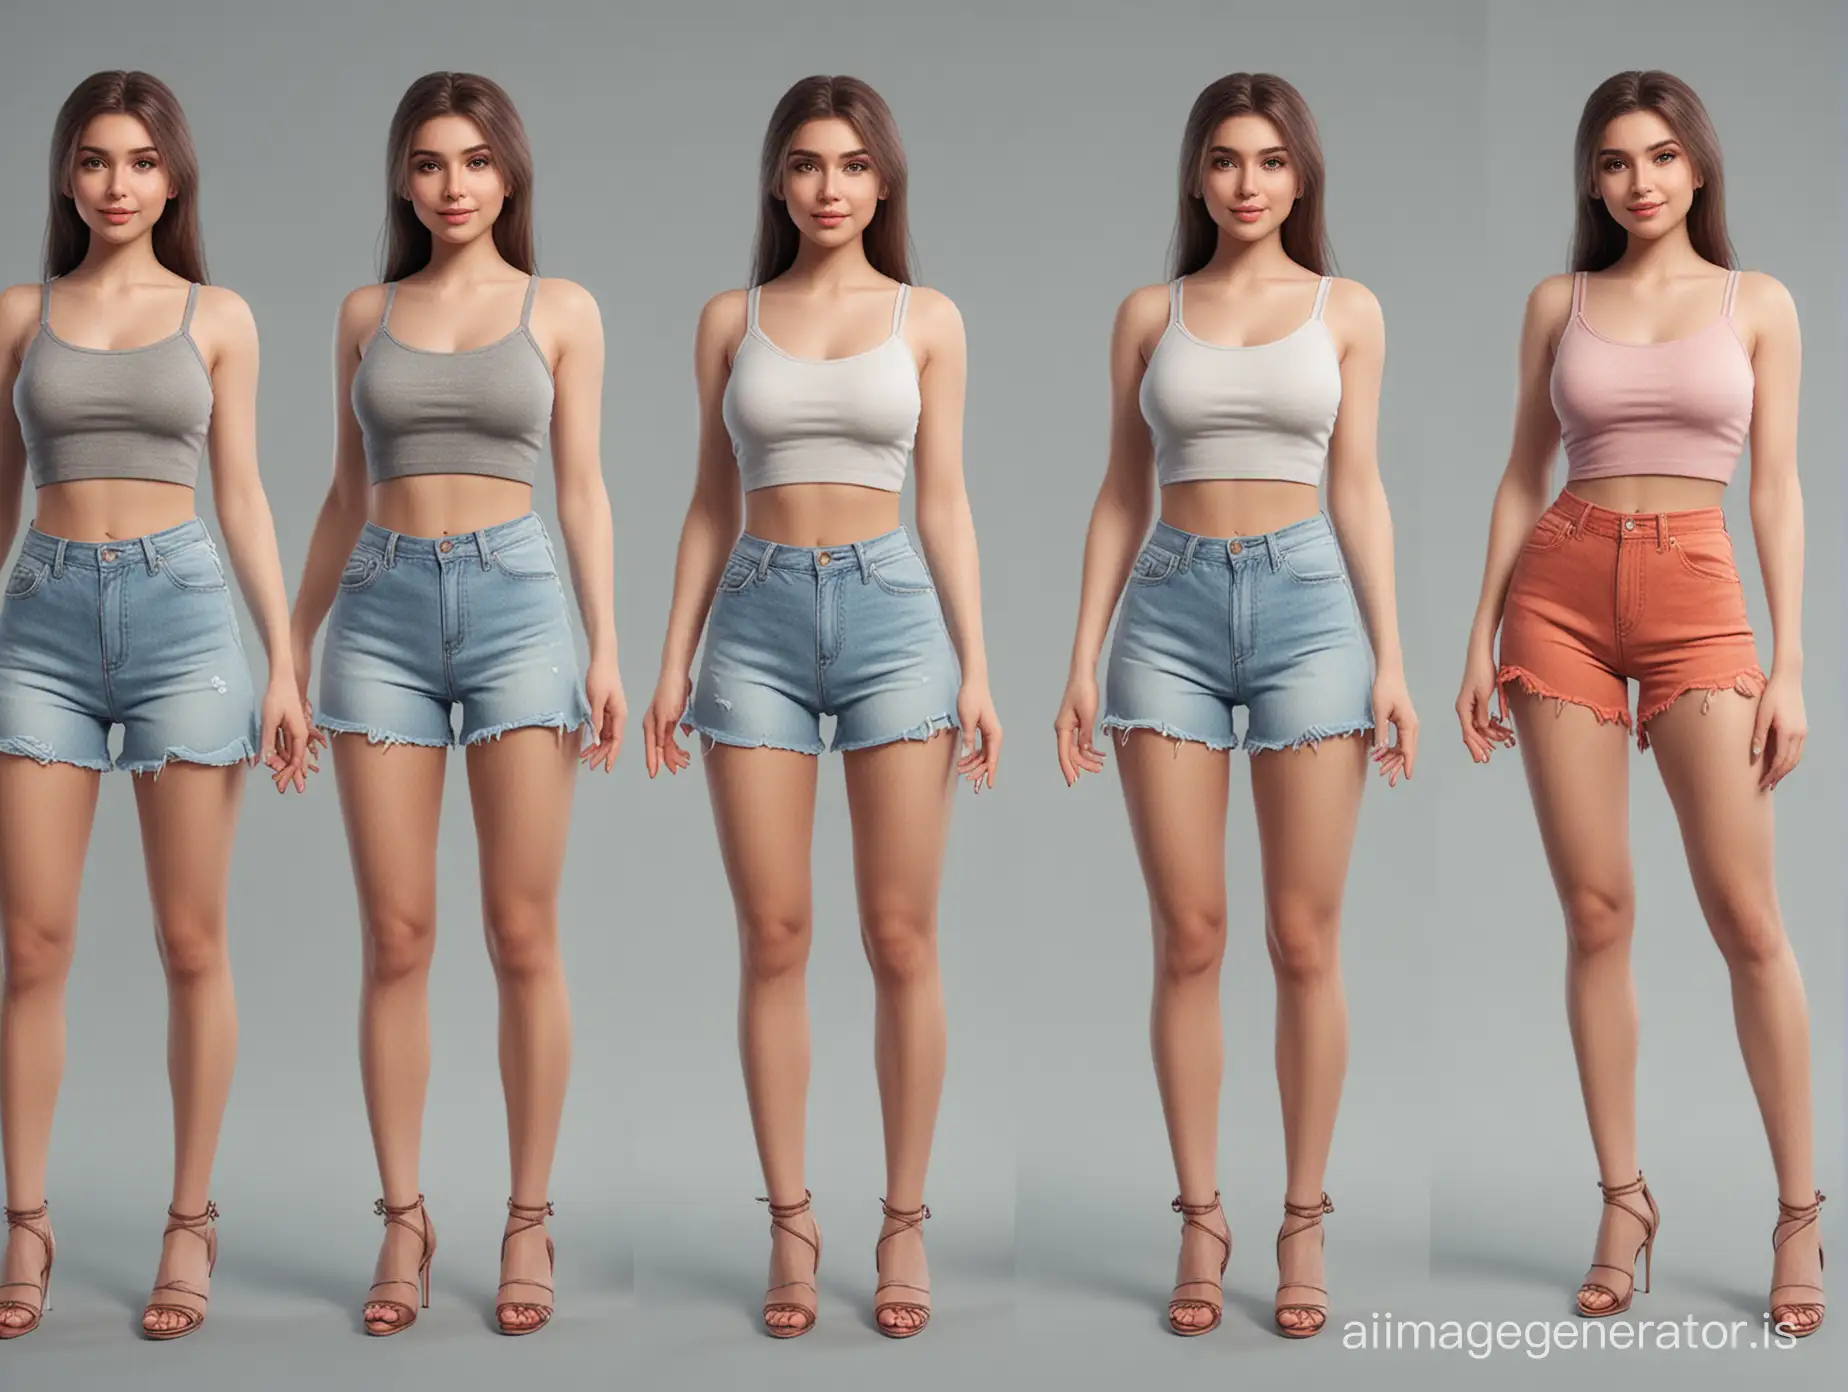 create FULL BODY
, realistic GIRLS influencers 4 POSES for Instagram